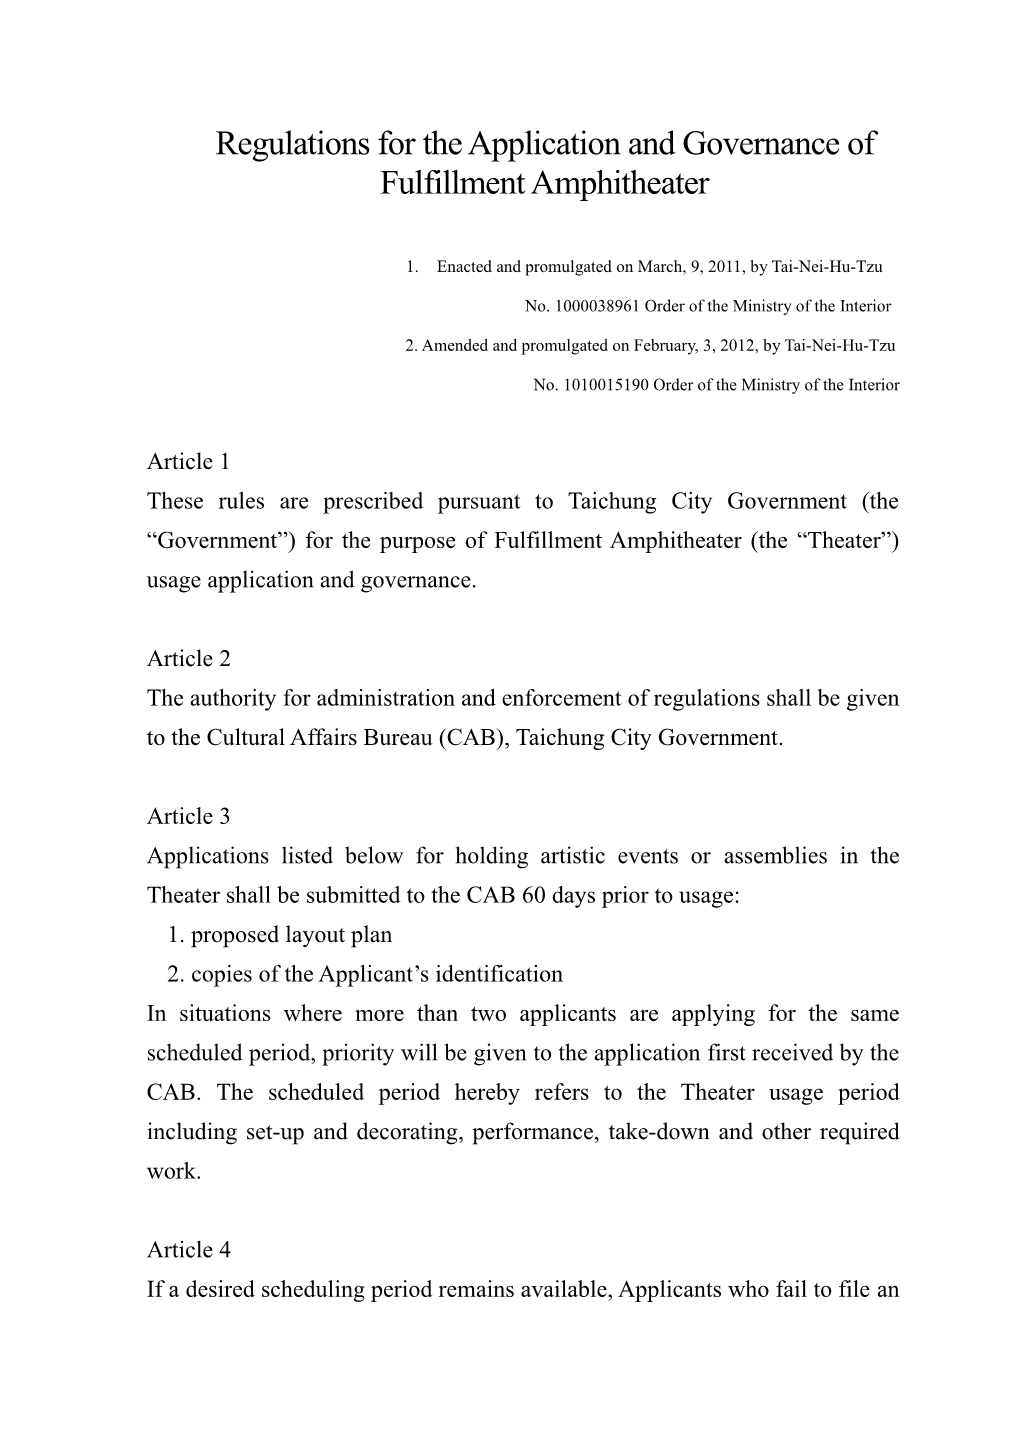 Regulations for the Application and Governance of Fulfillment Amphitheater